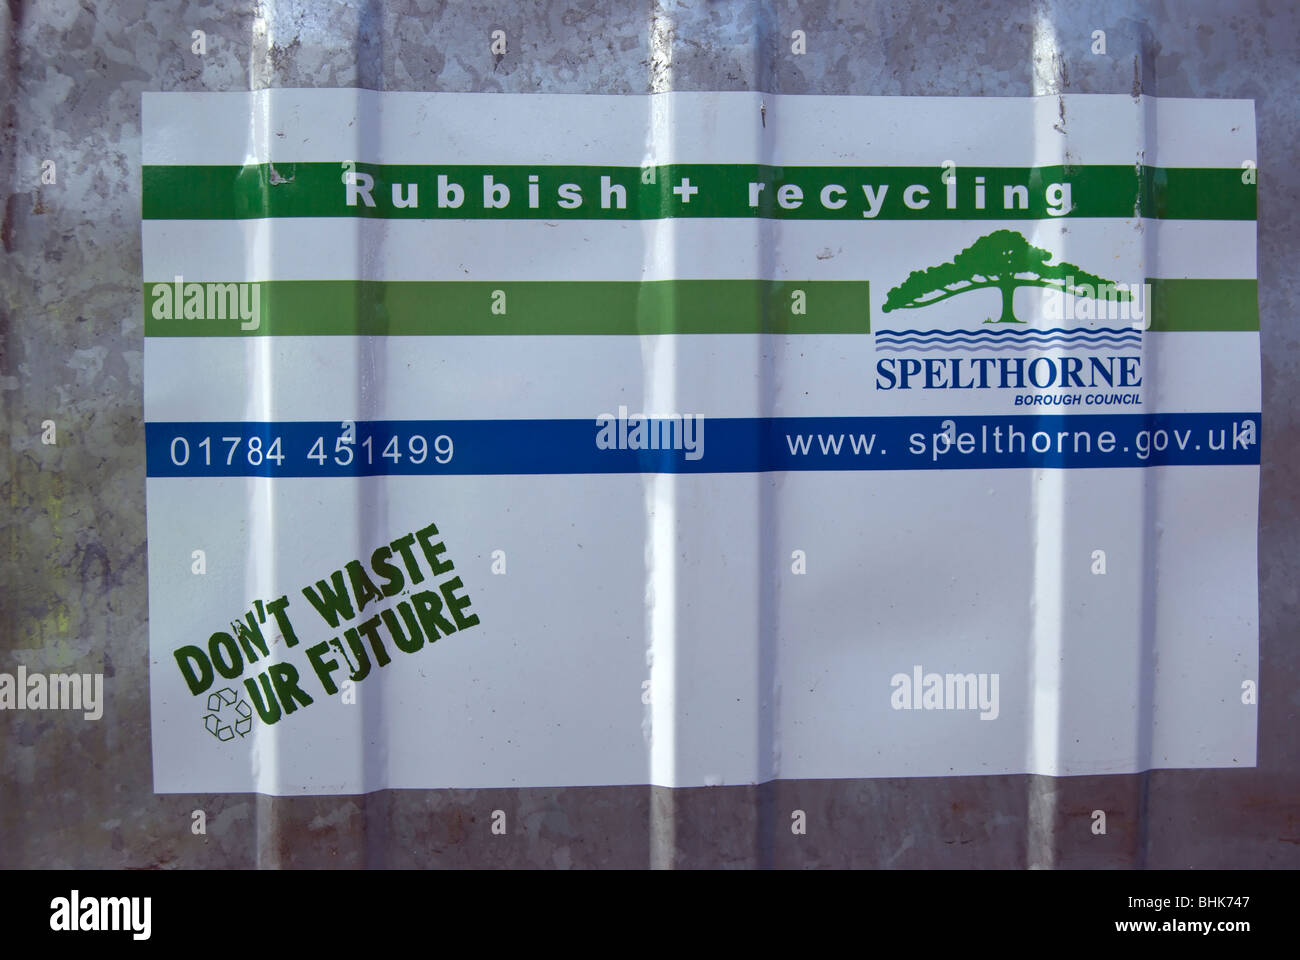 rubbish and recycling label on recycling bin belonging to spelthorne borough council, in shepperton, middlesex, england Stock Photo